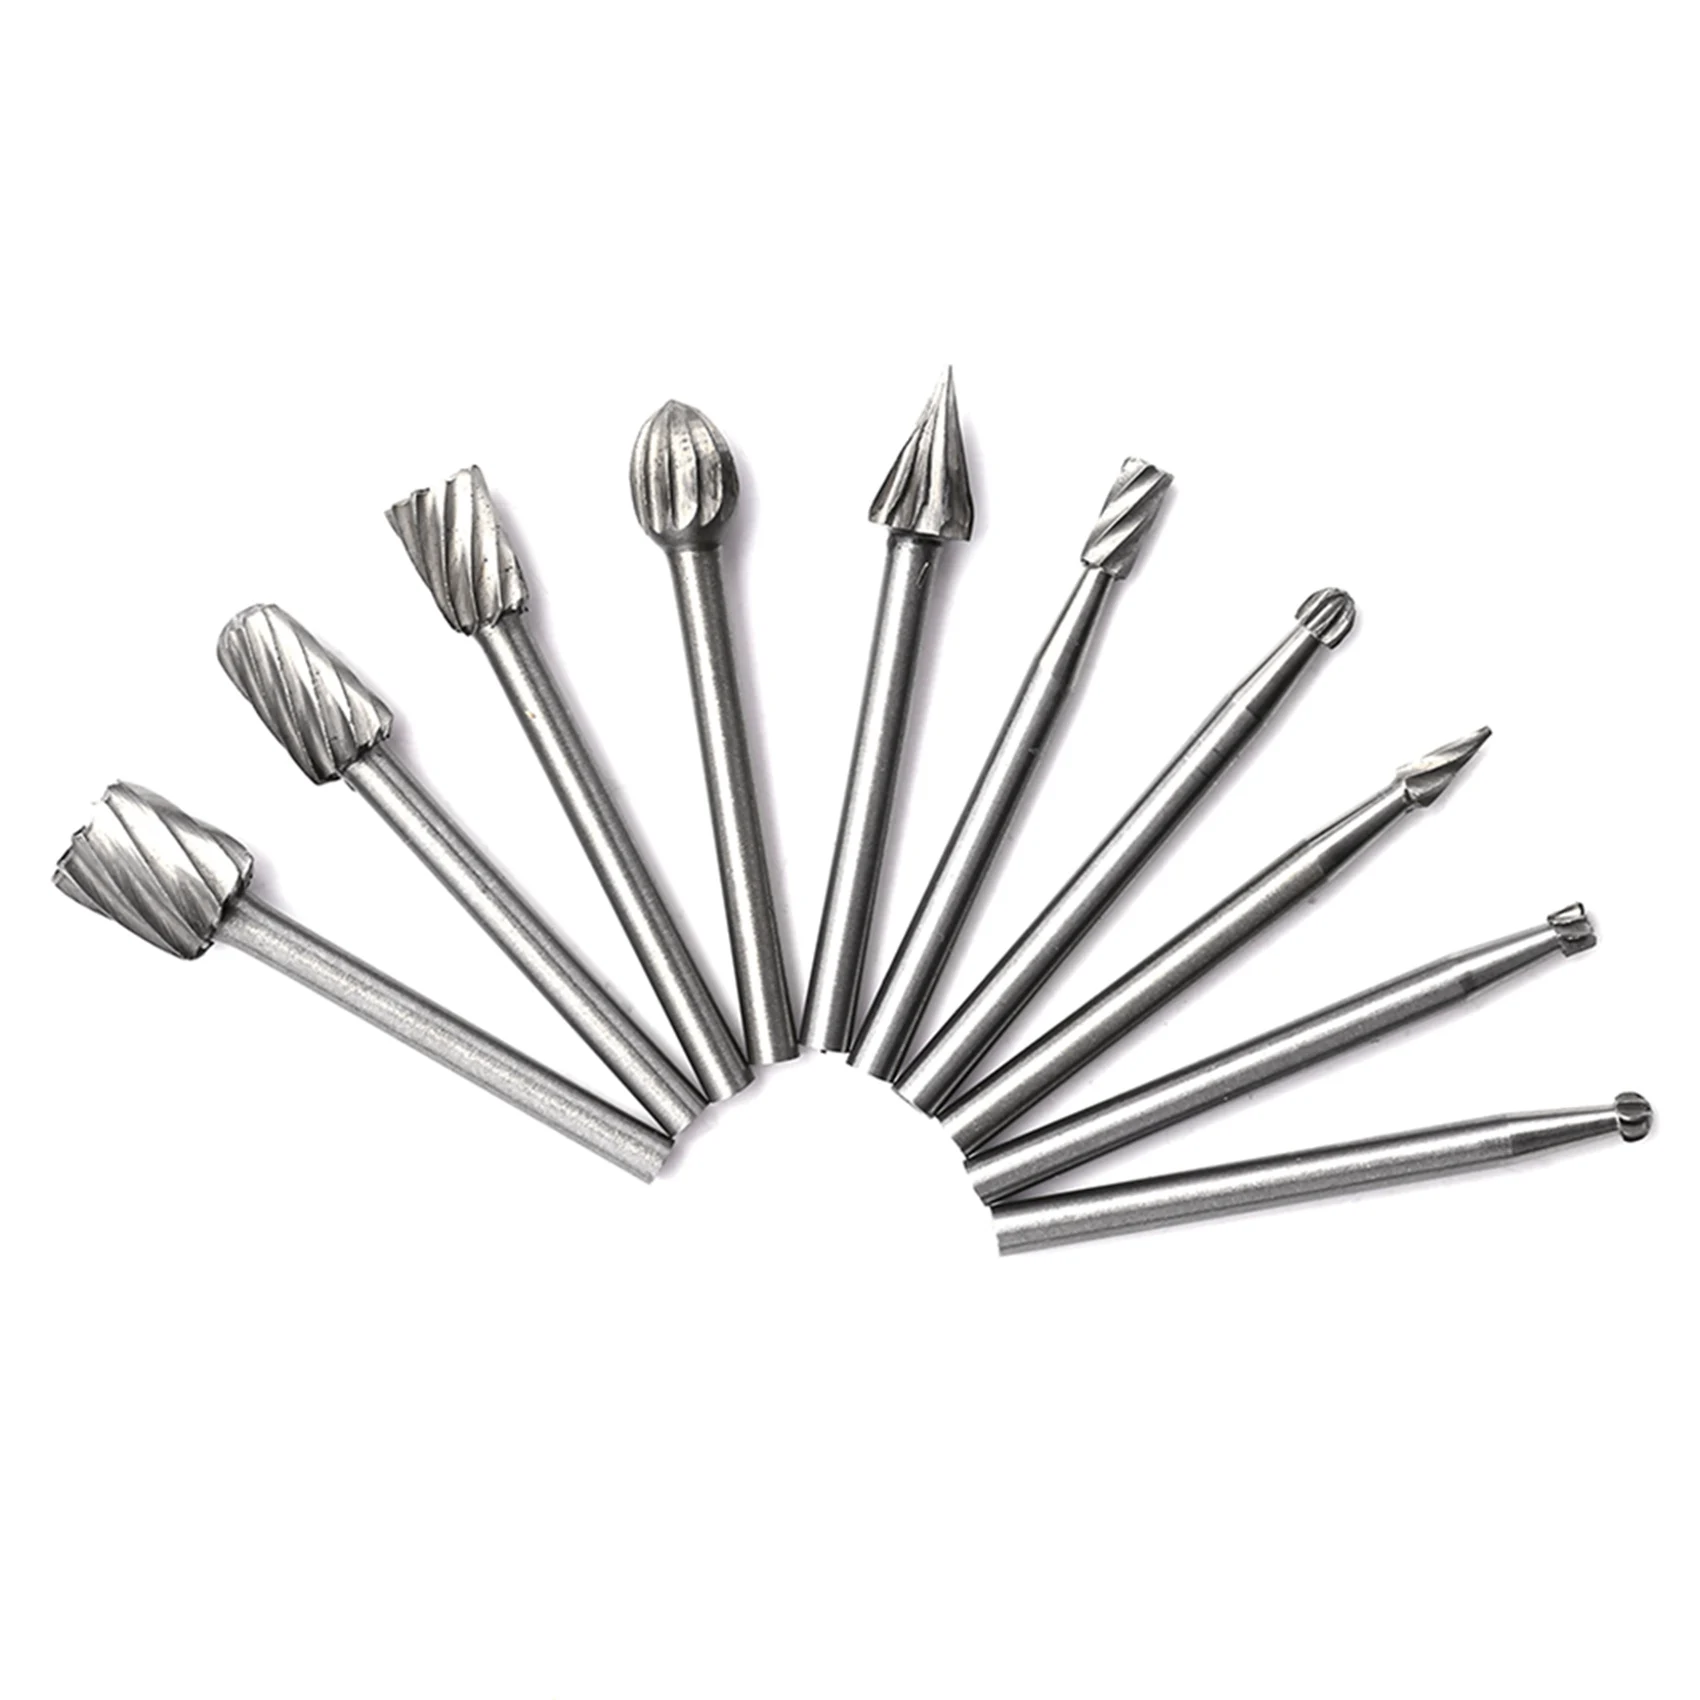 

10pcs HSS Tungsten Carbide Rotary Cutting Burr Set Grinder Bit 1/8 inch (3mm) Shank Woodworking Carving Tools